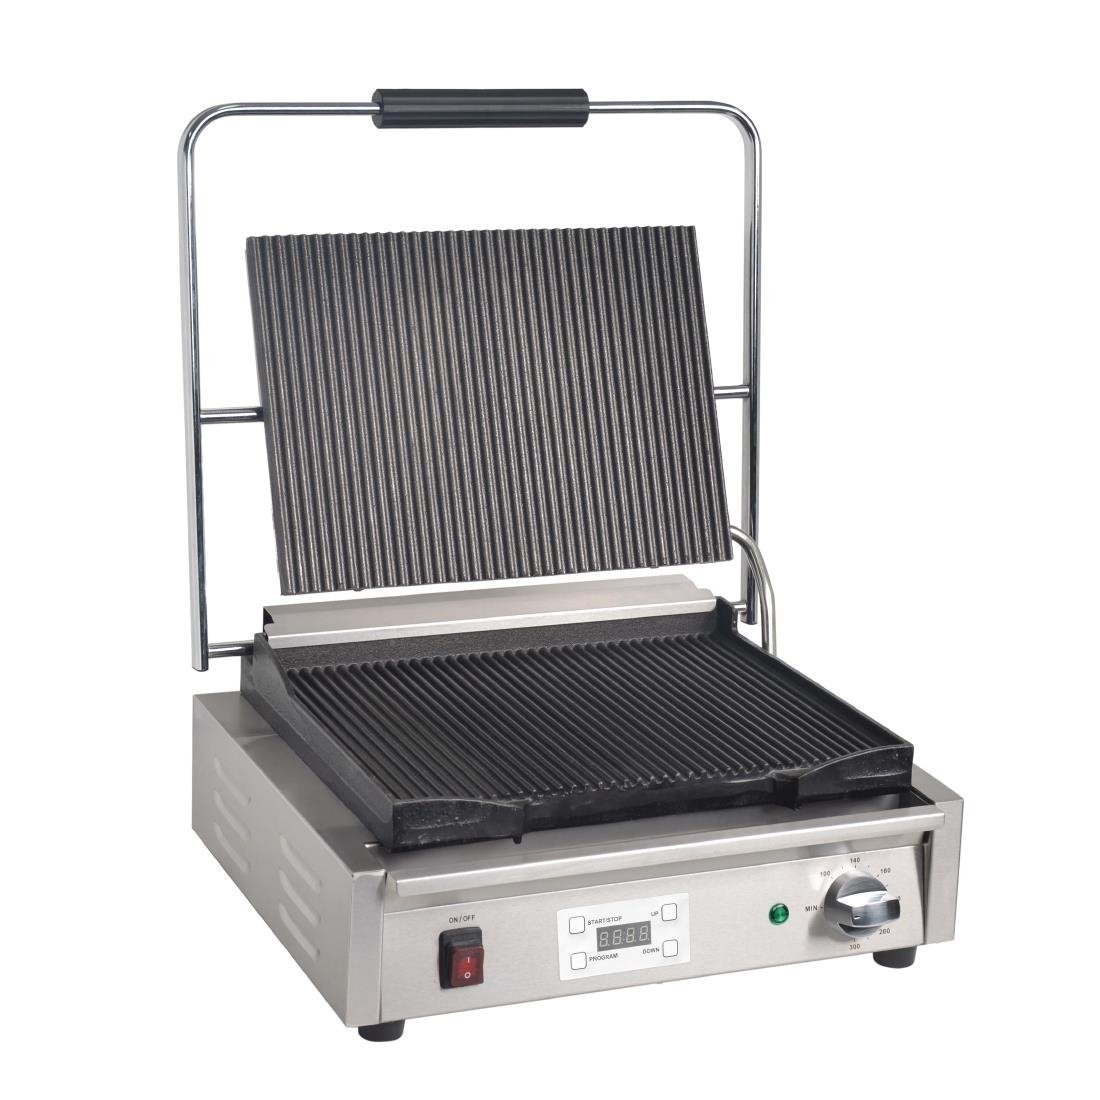 Contactgrill Groot | Groef/Groef | 2200W | 480x435x(H)215mm